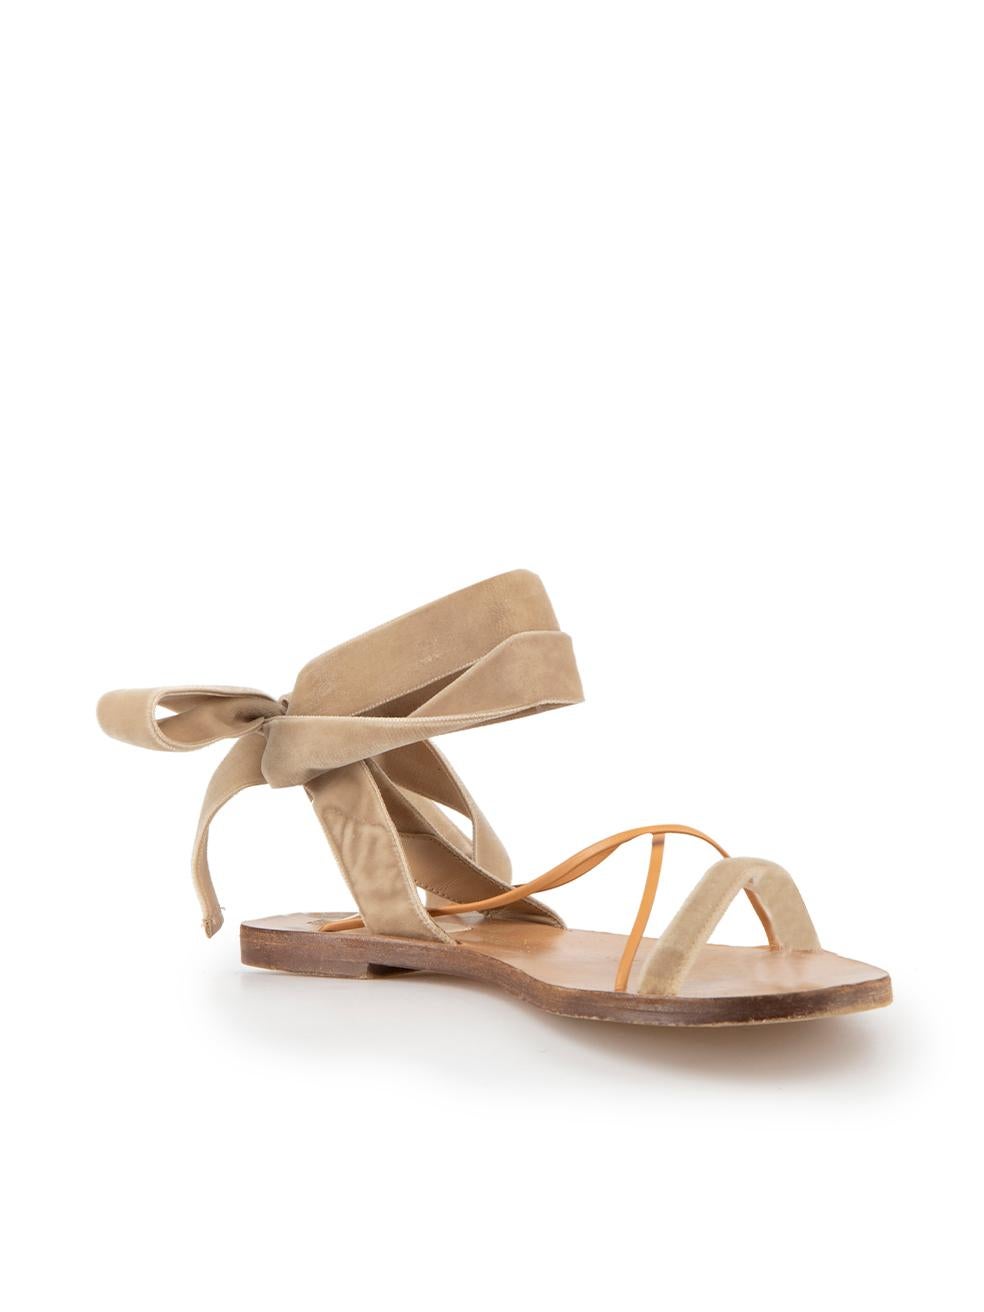 CONDITION is Good. Minor wear to shoes is evident. Light wear to the footbeds of both shoes with marks and abrasions, particularly at the toes on this used Valentino designer resale item.
 
 Details
 Brown
 Velvet
 Strappy sandals
 Open toe
 Falt